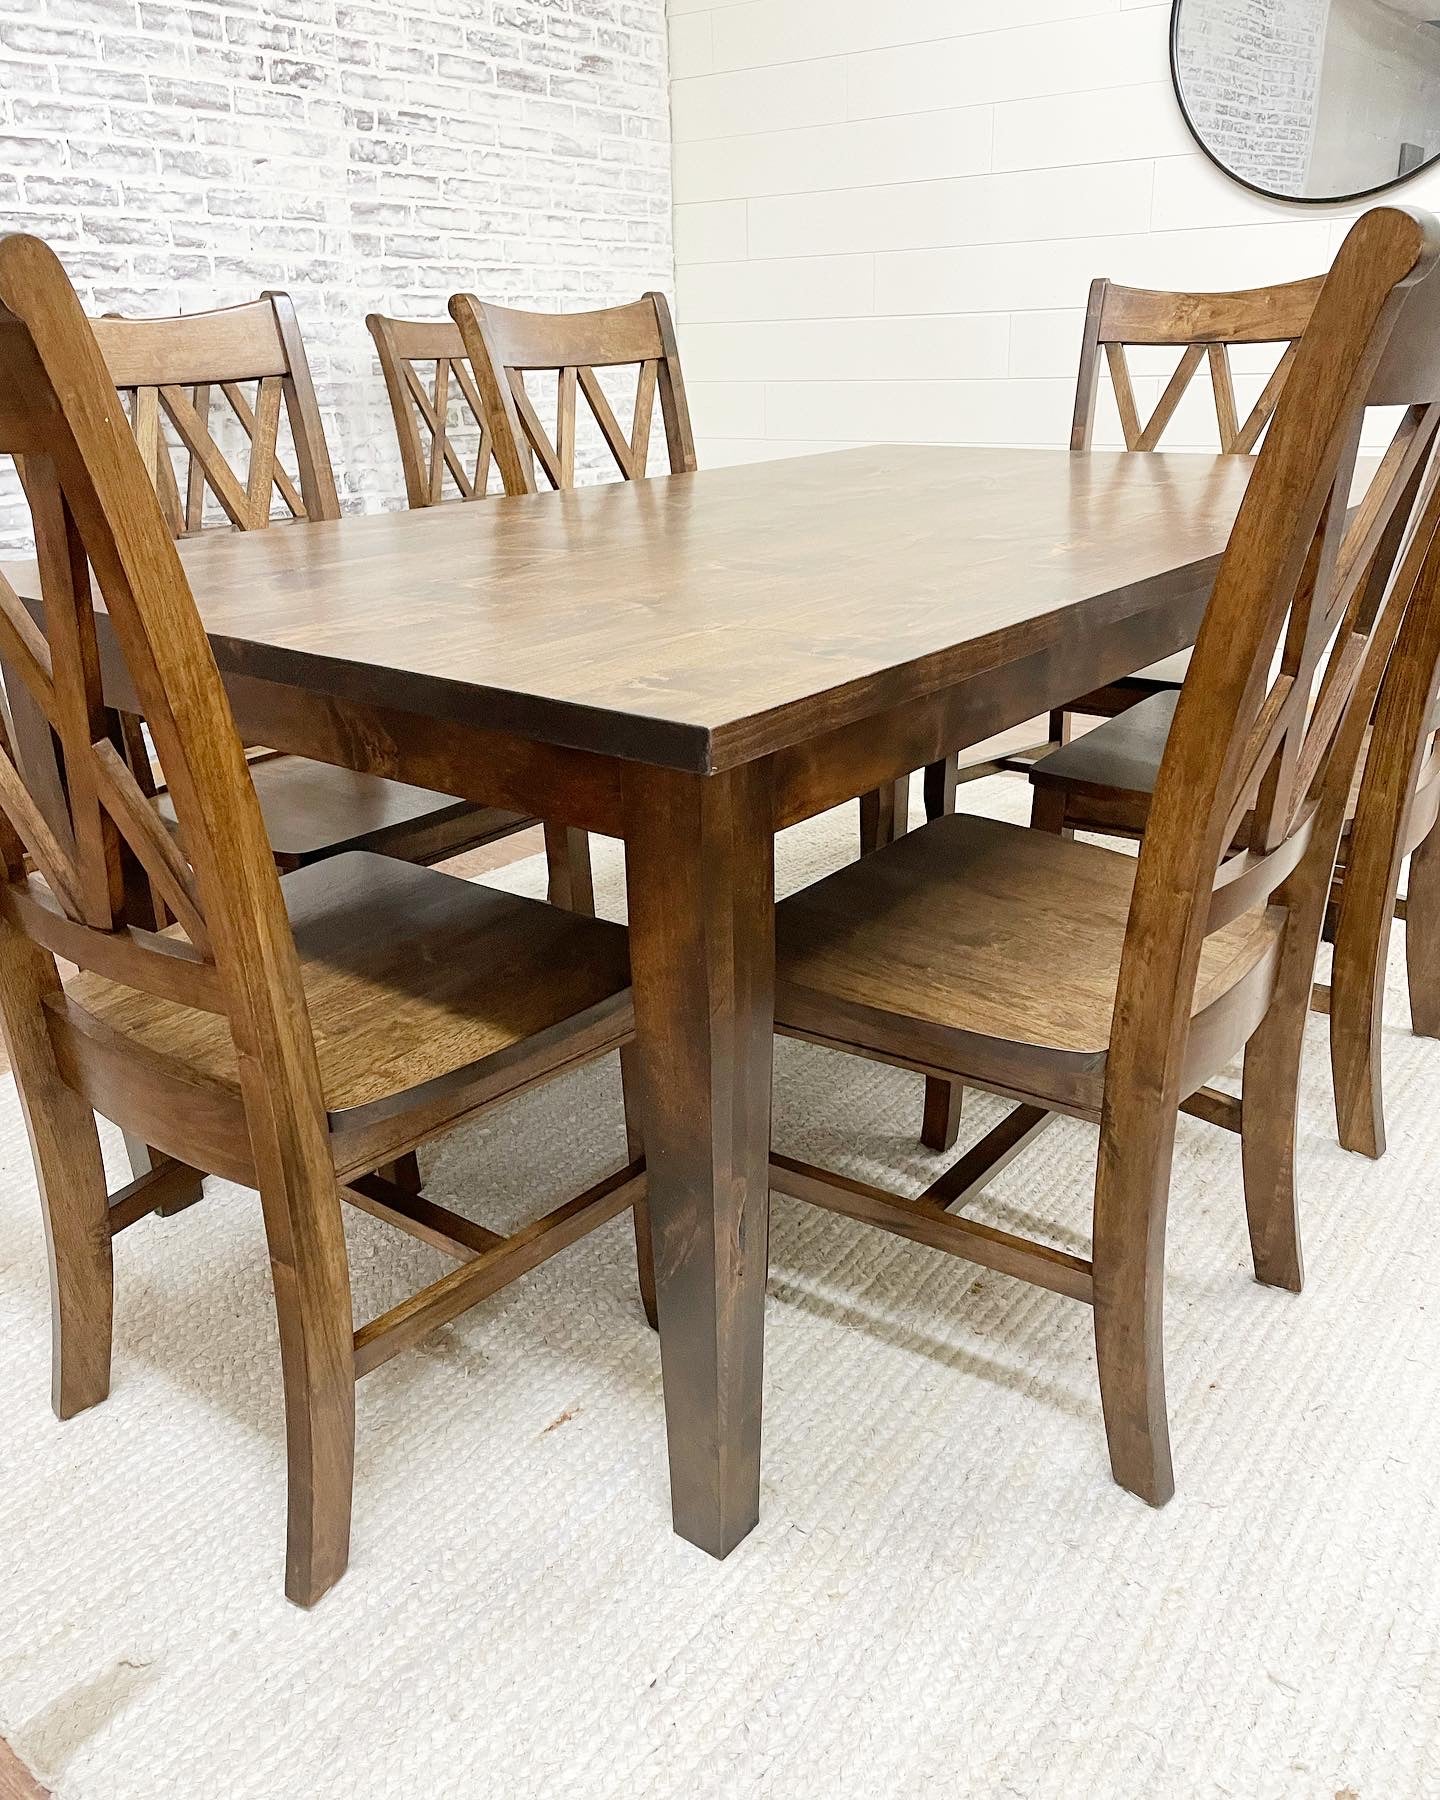 Pictured with a 6' L x 42" W Rustic Alder Table stained Espresso. Pictured with 6 Double Cross Back Dining Chairs. 